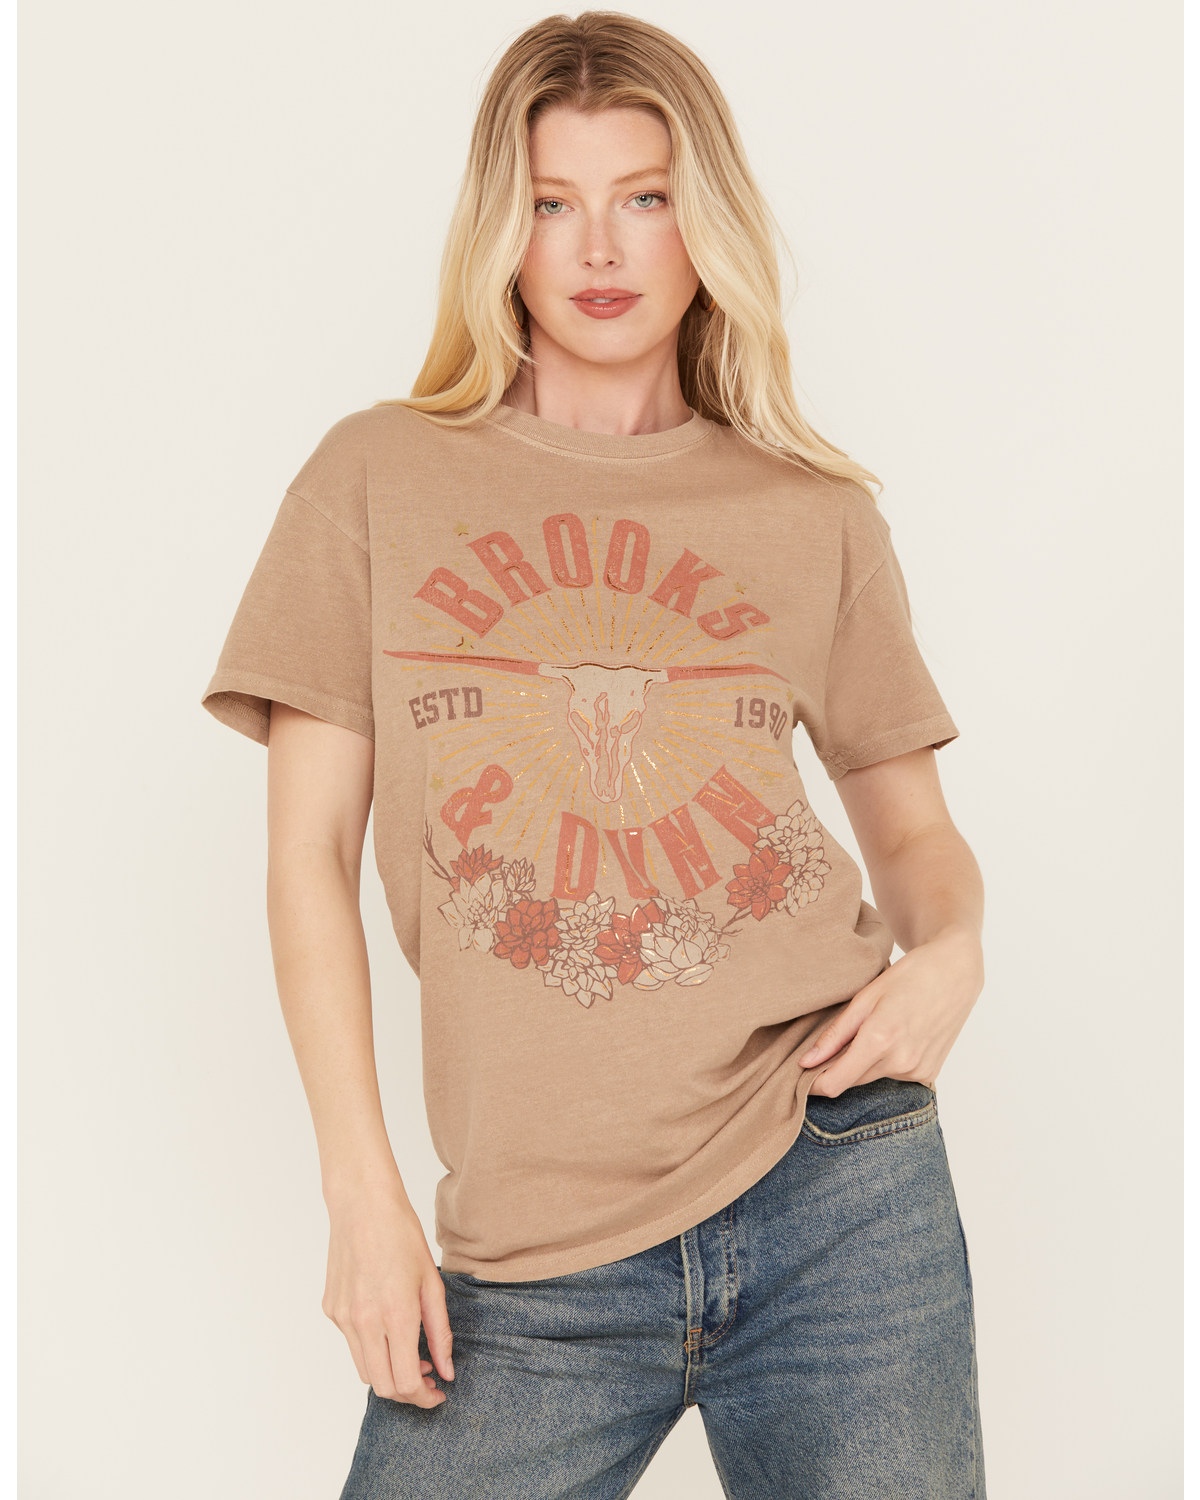 Goodie Two Sleeves Women's Brooks & Dunn Oversized Foil Graphic Tee